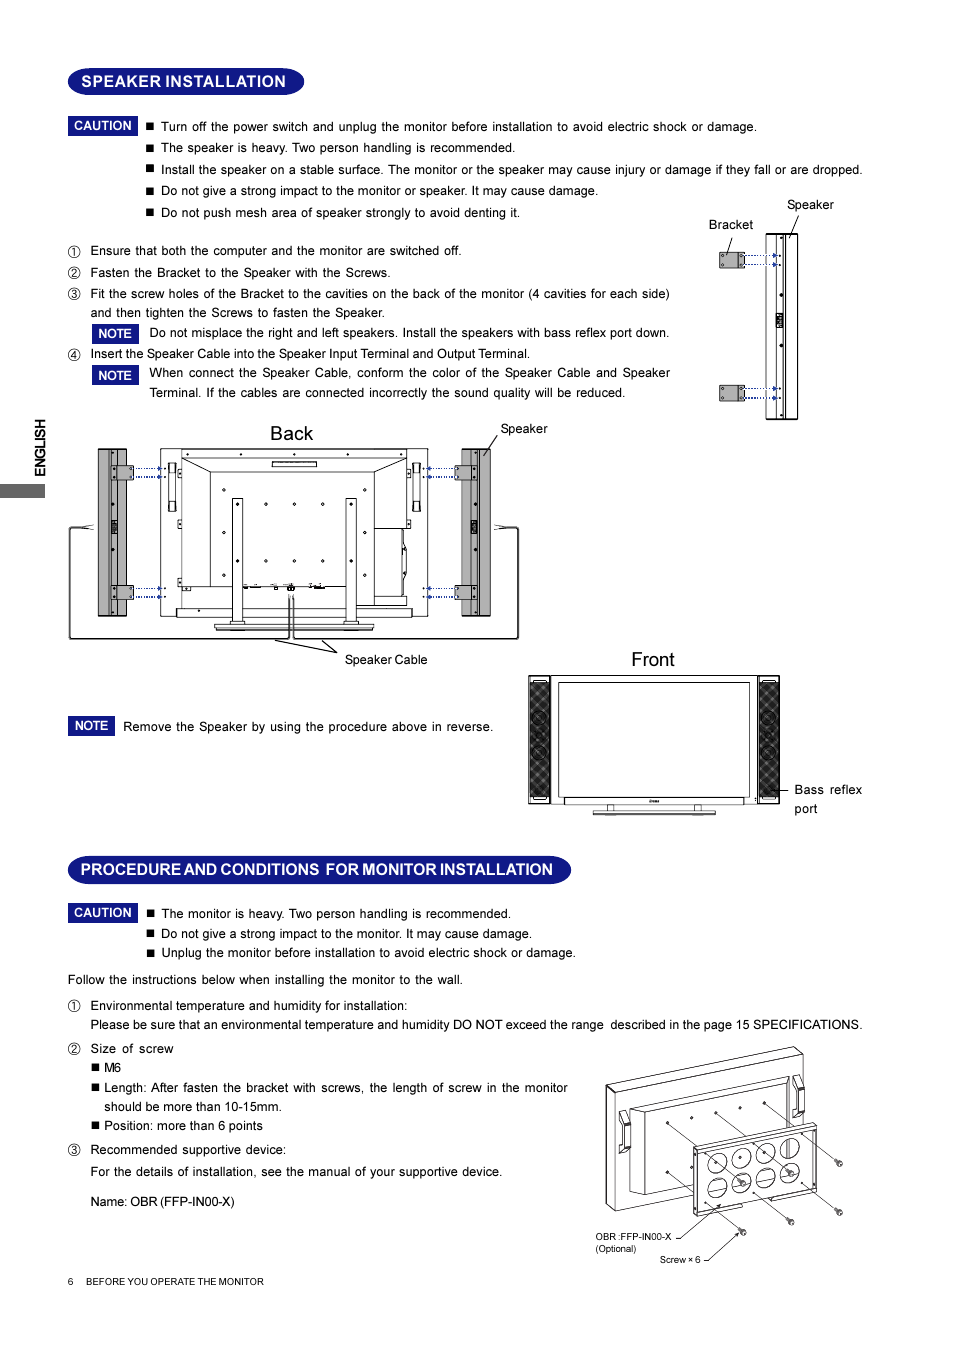 Back, Front, Speaker installation | Procedure and conditions for monitor installation | Iiyama L403W User Manual | Page 8 / 32